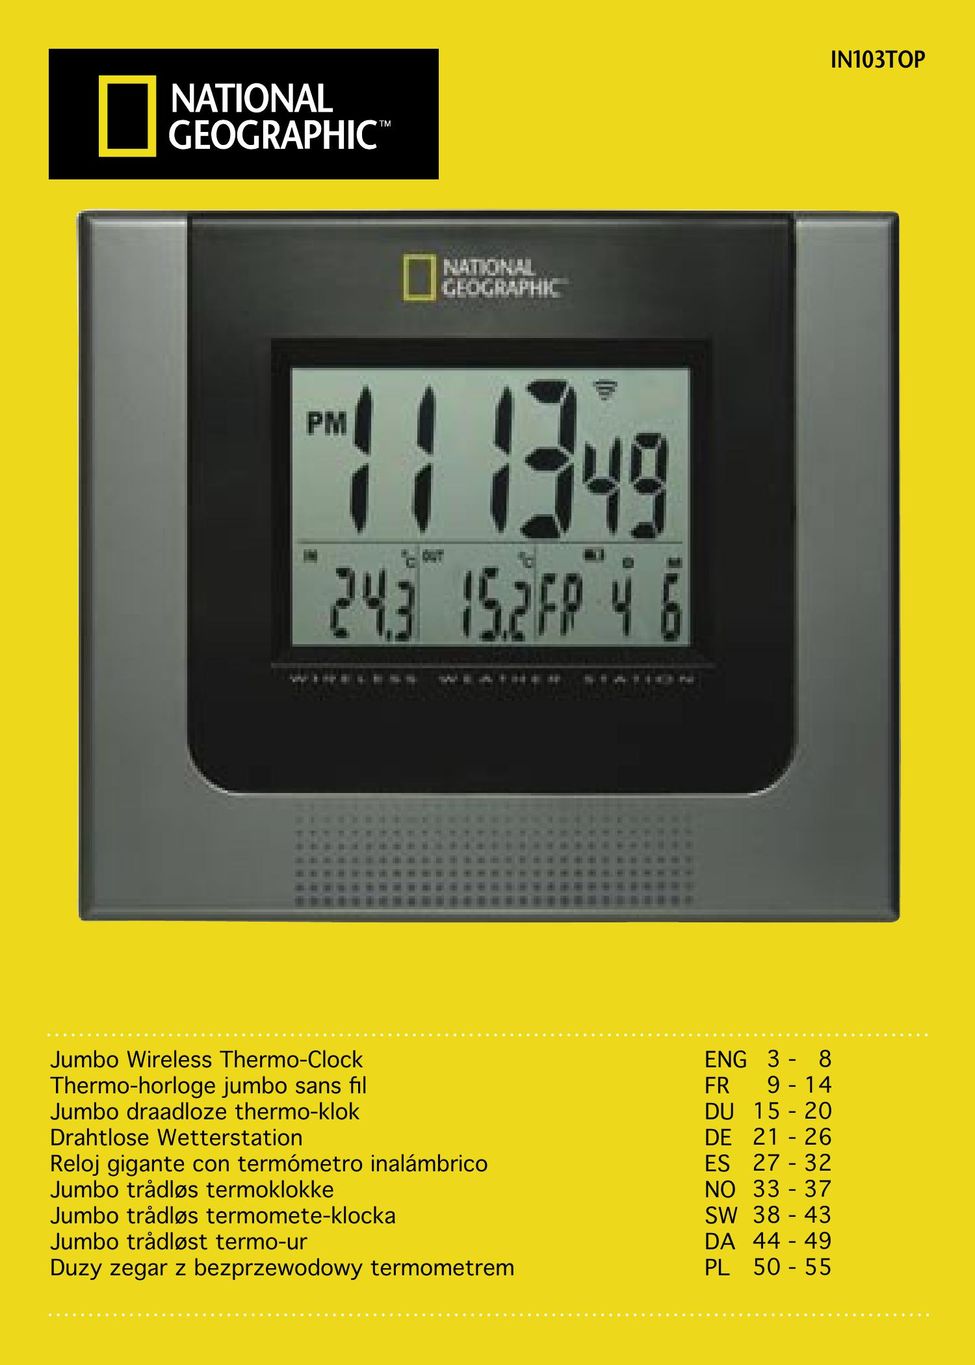 National Geographic IN103TOP Clock User Manual